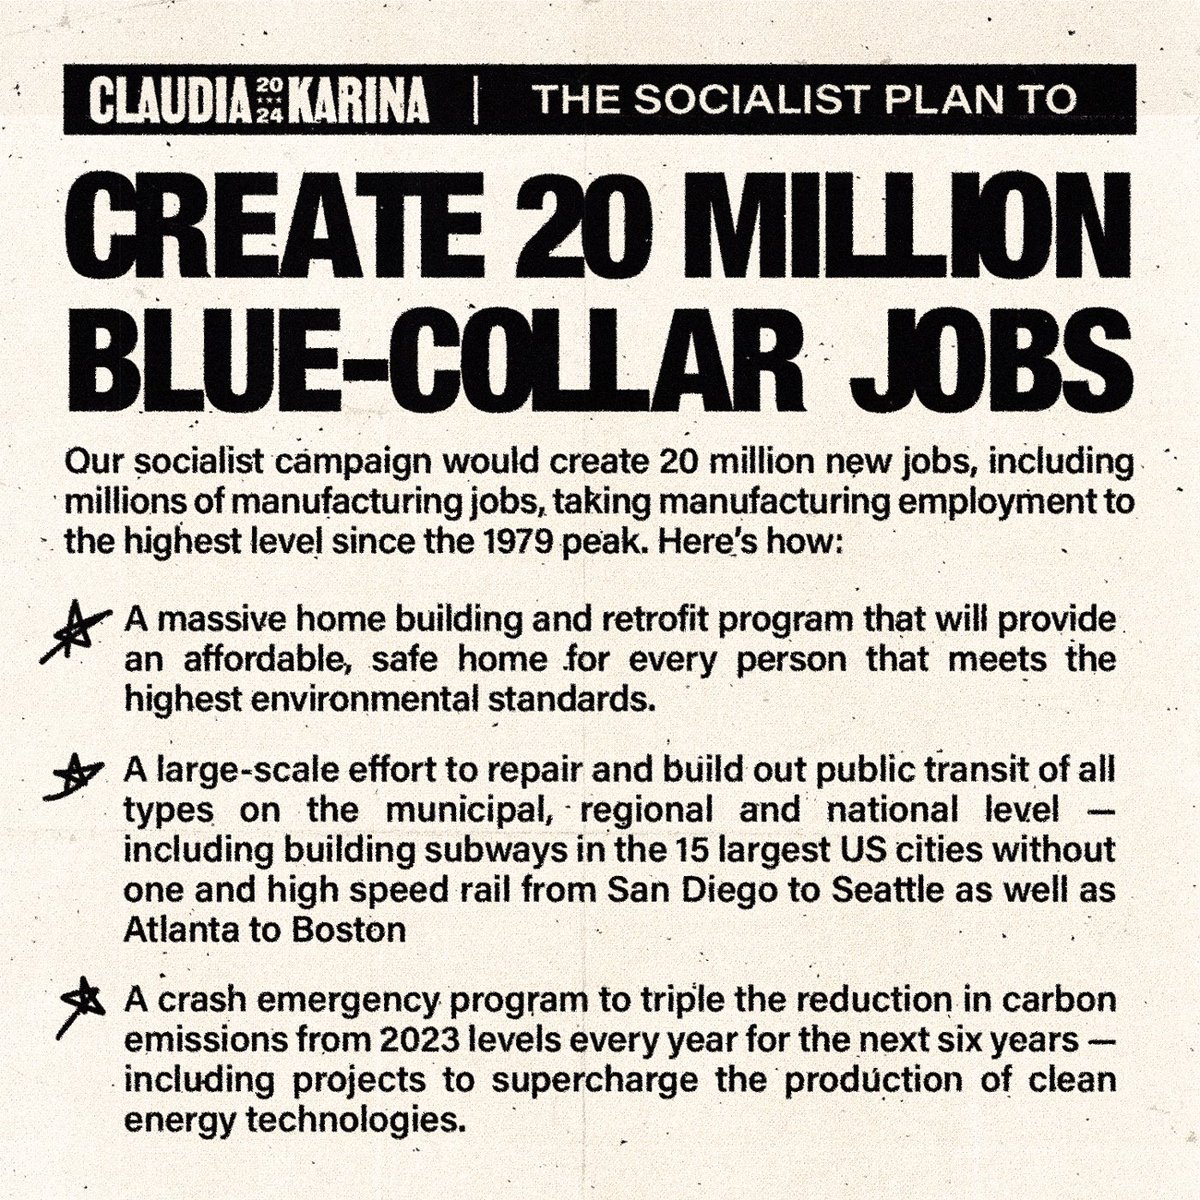 Today, Joe Biden is speaking at a union headquarters in Pittsburgh making false promises to workers. Our socialist campaign is fighting to make a job a fundamental right. ➡️Learn how our socialist program could pave the way to create 20 million blue collar jobs!